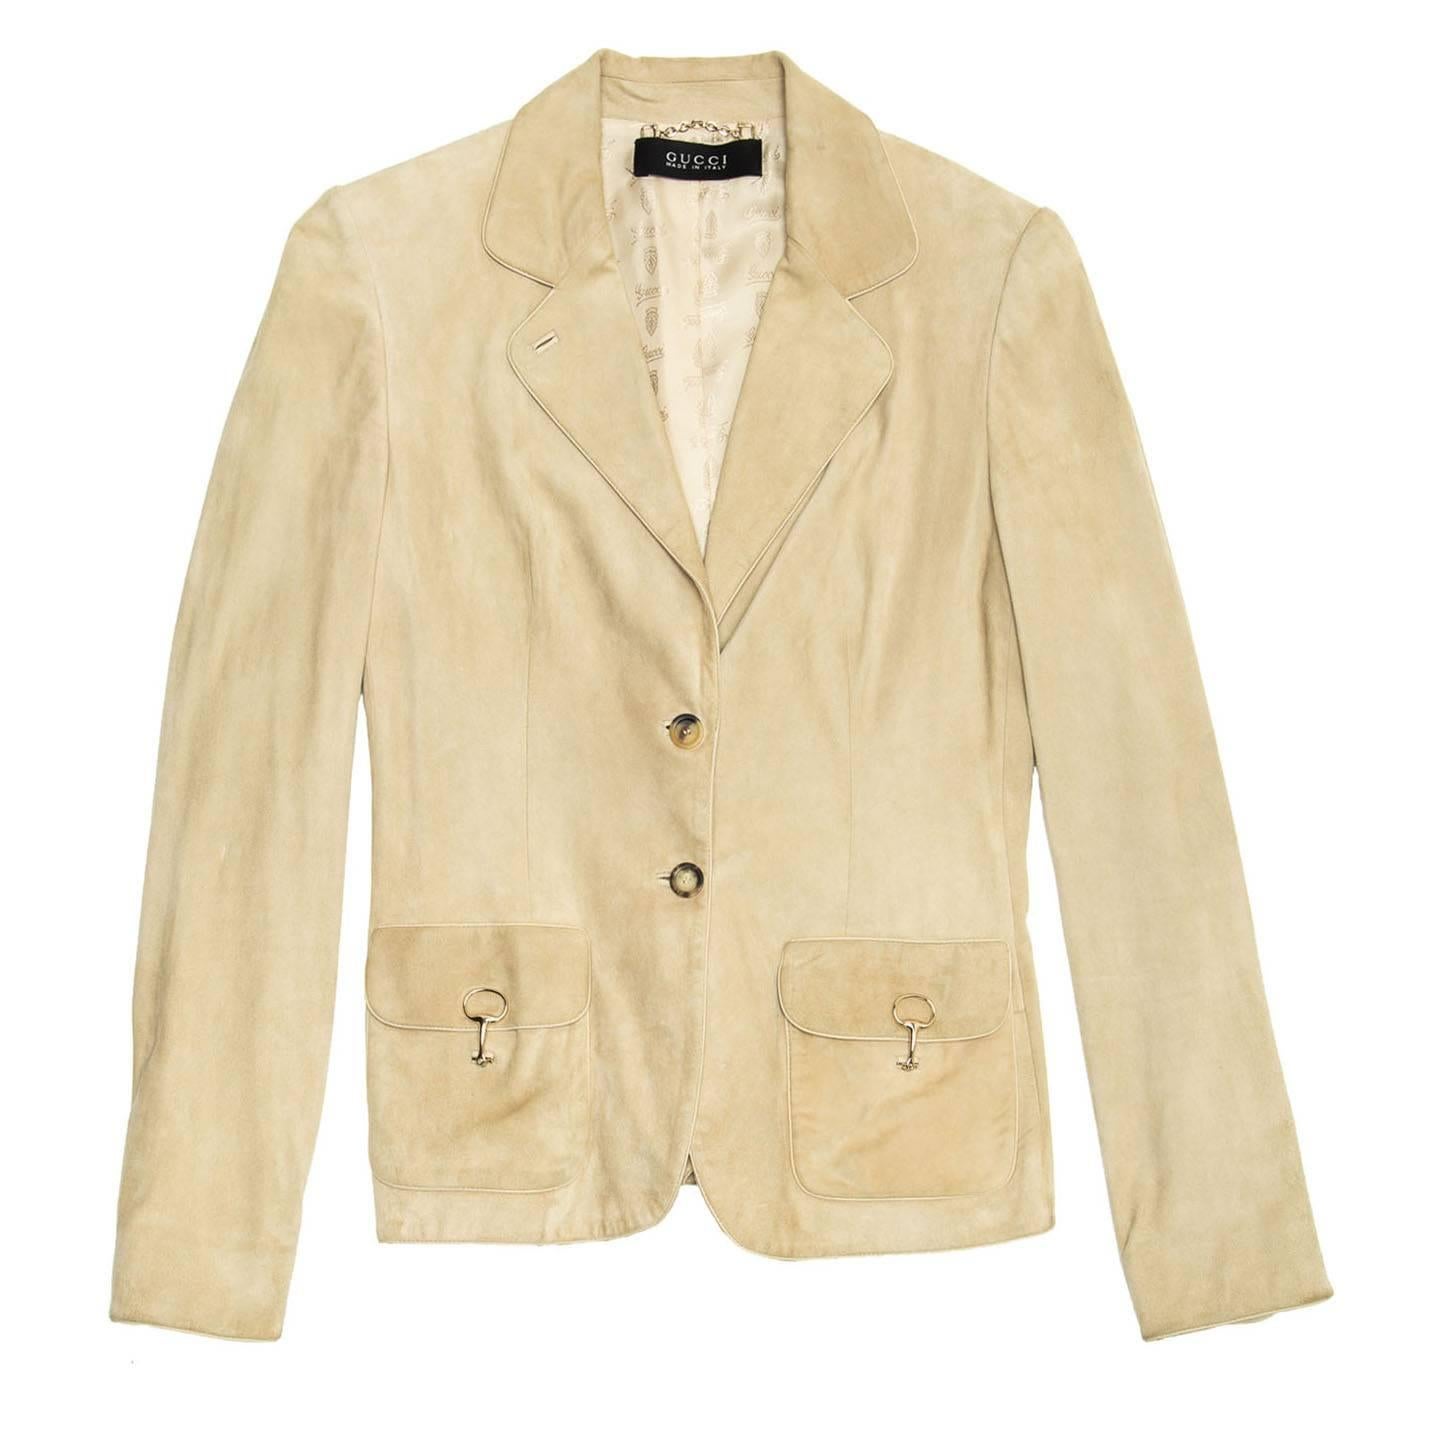 Beige suede jacket that fastens on front with two horn buttons. The lapel is of a medium size embellished with tone-on-tone leather piping to match hem and cuffs that are also characterized by a little vent with round profiles. The patch pockets are